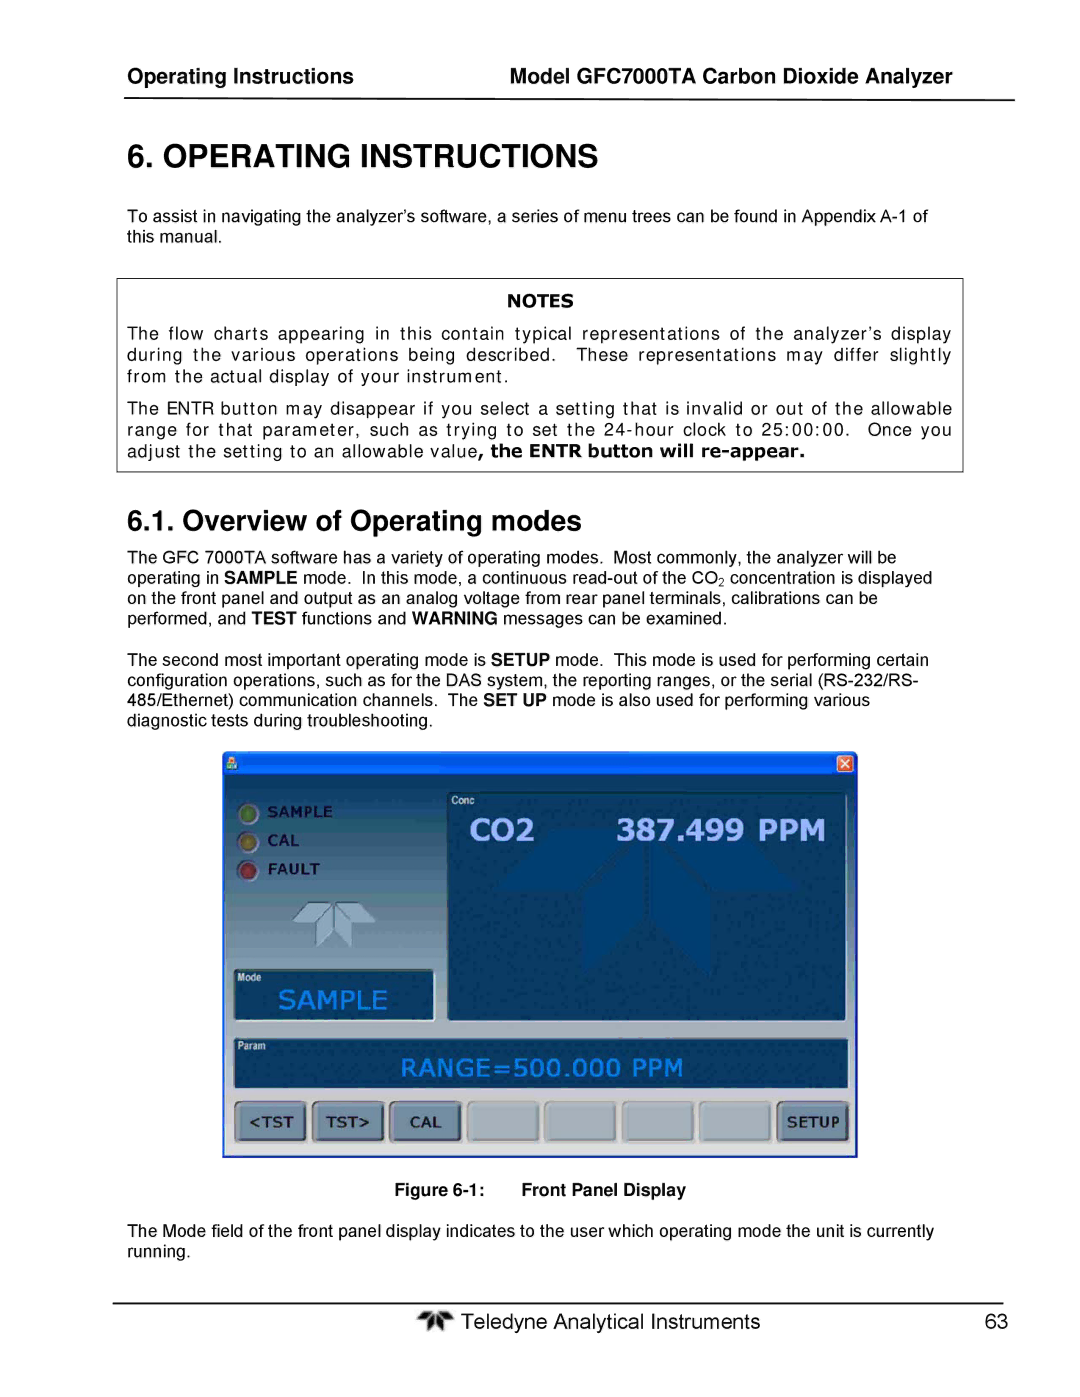 Teledyne gfc 7000ta operation manual Overview of Operating modes, Front Panel Display 